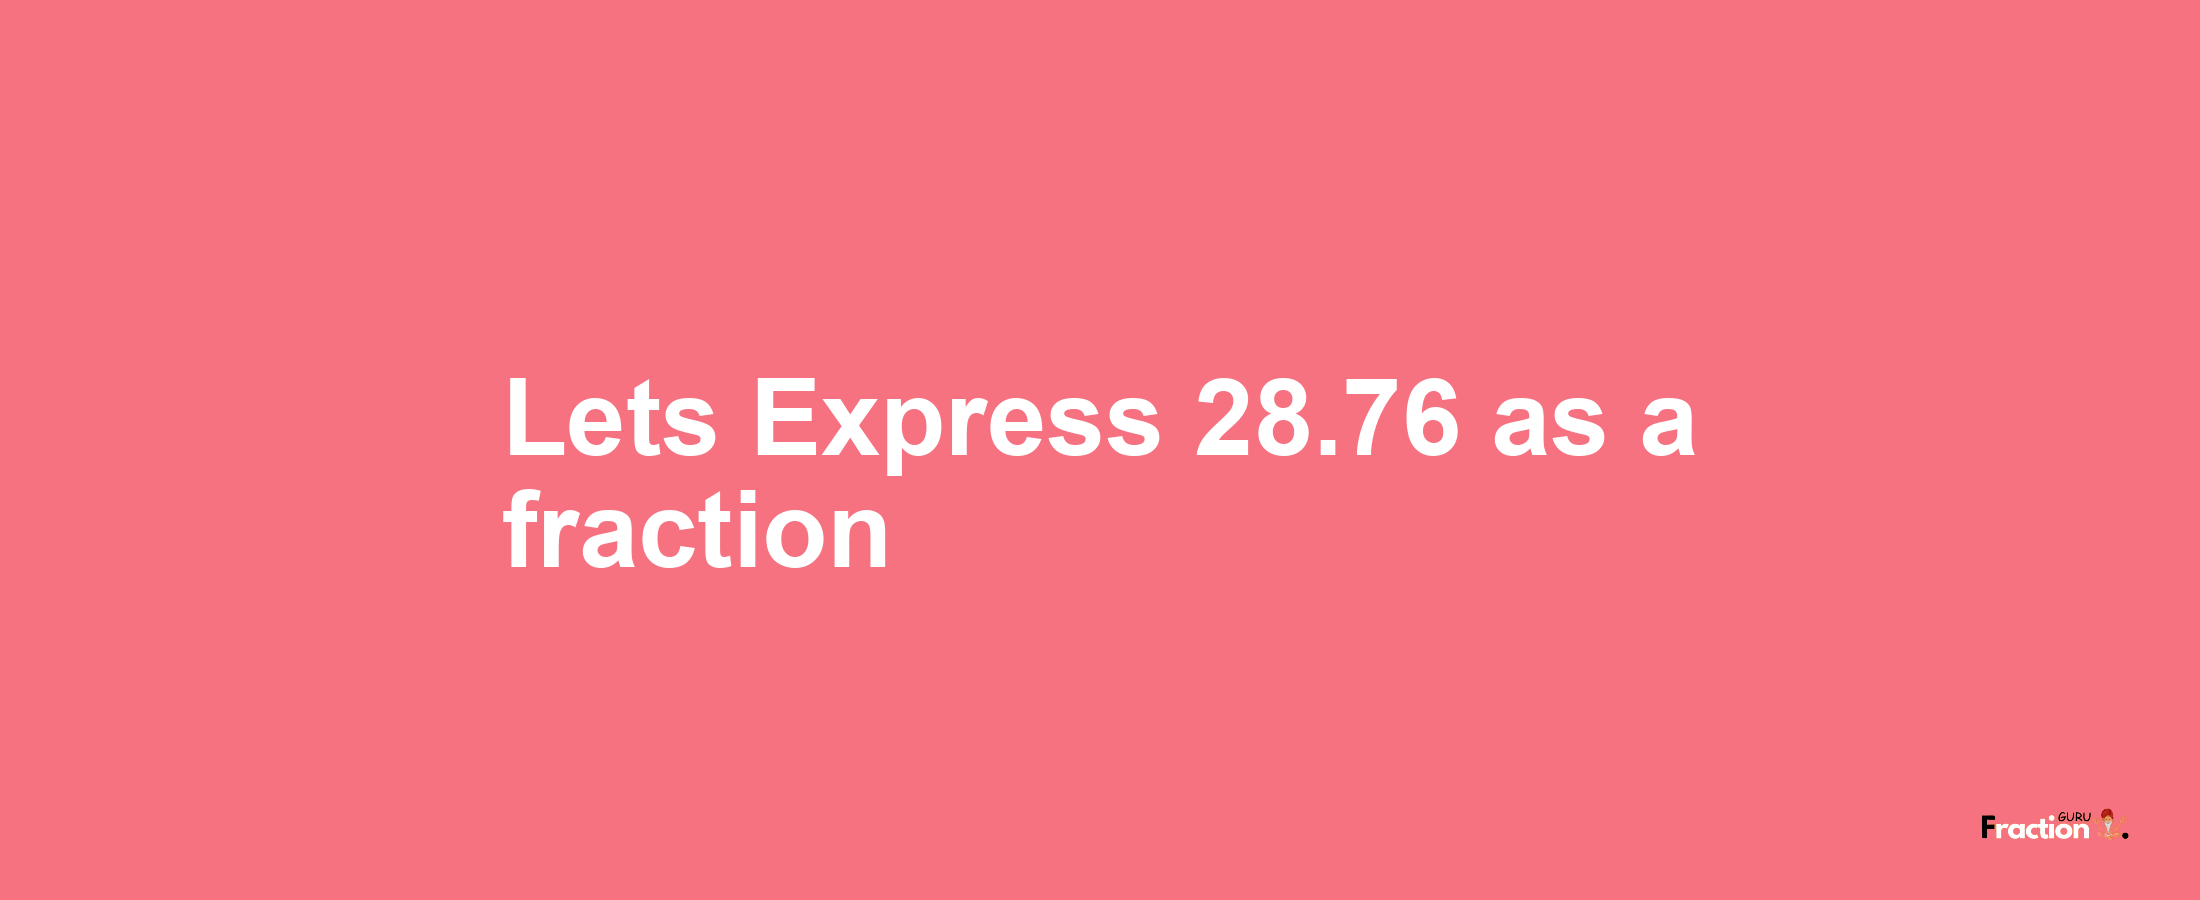 Lets Express 28.76 as afraction